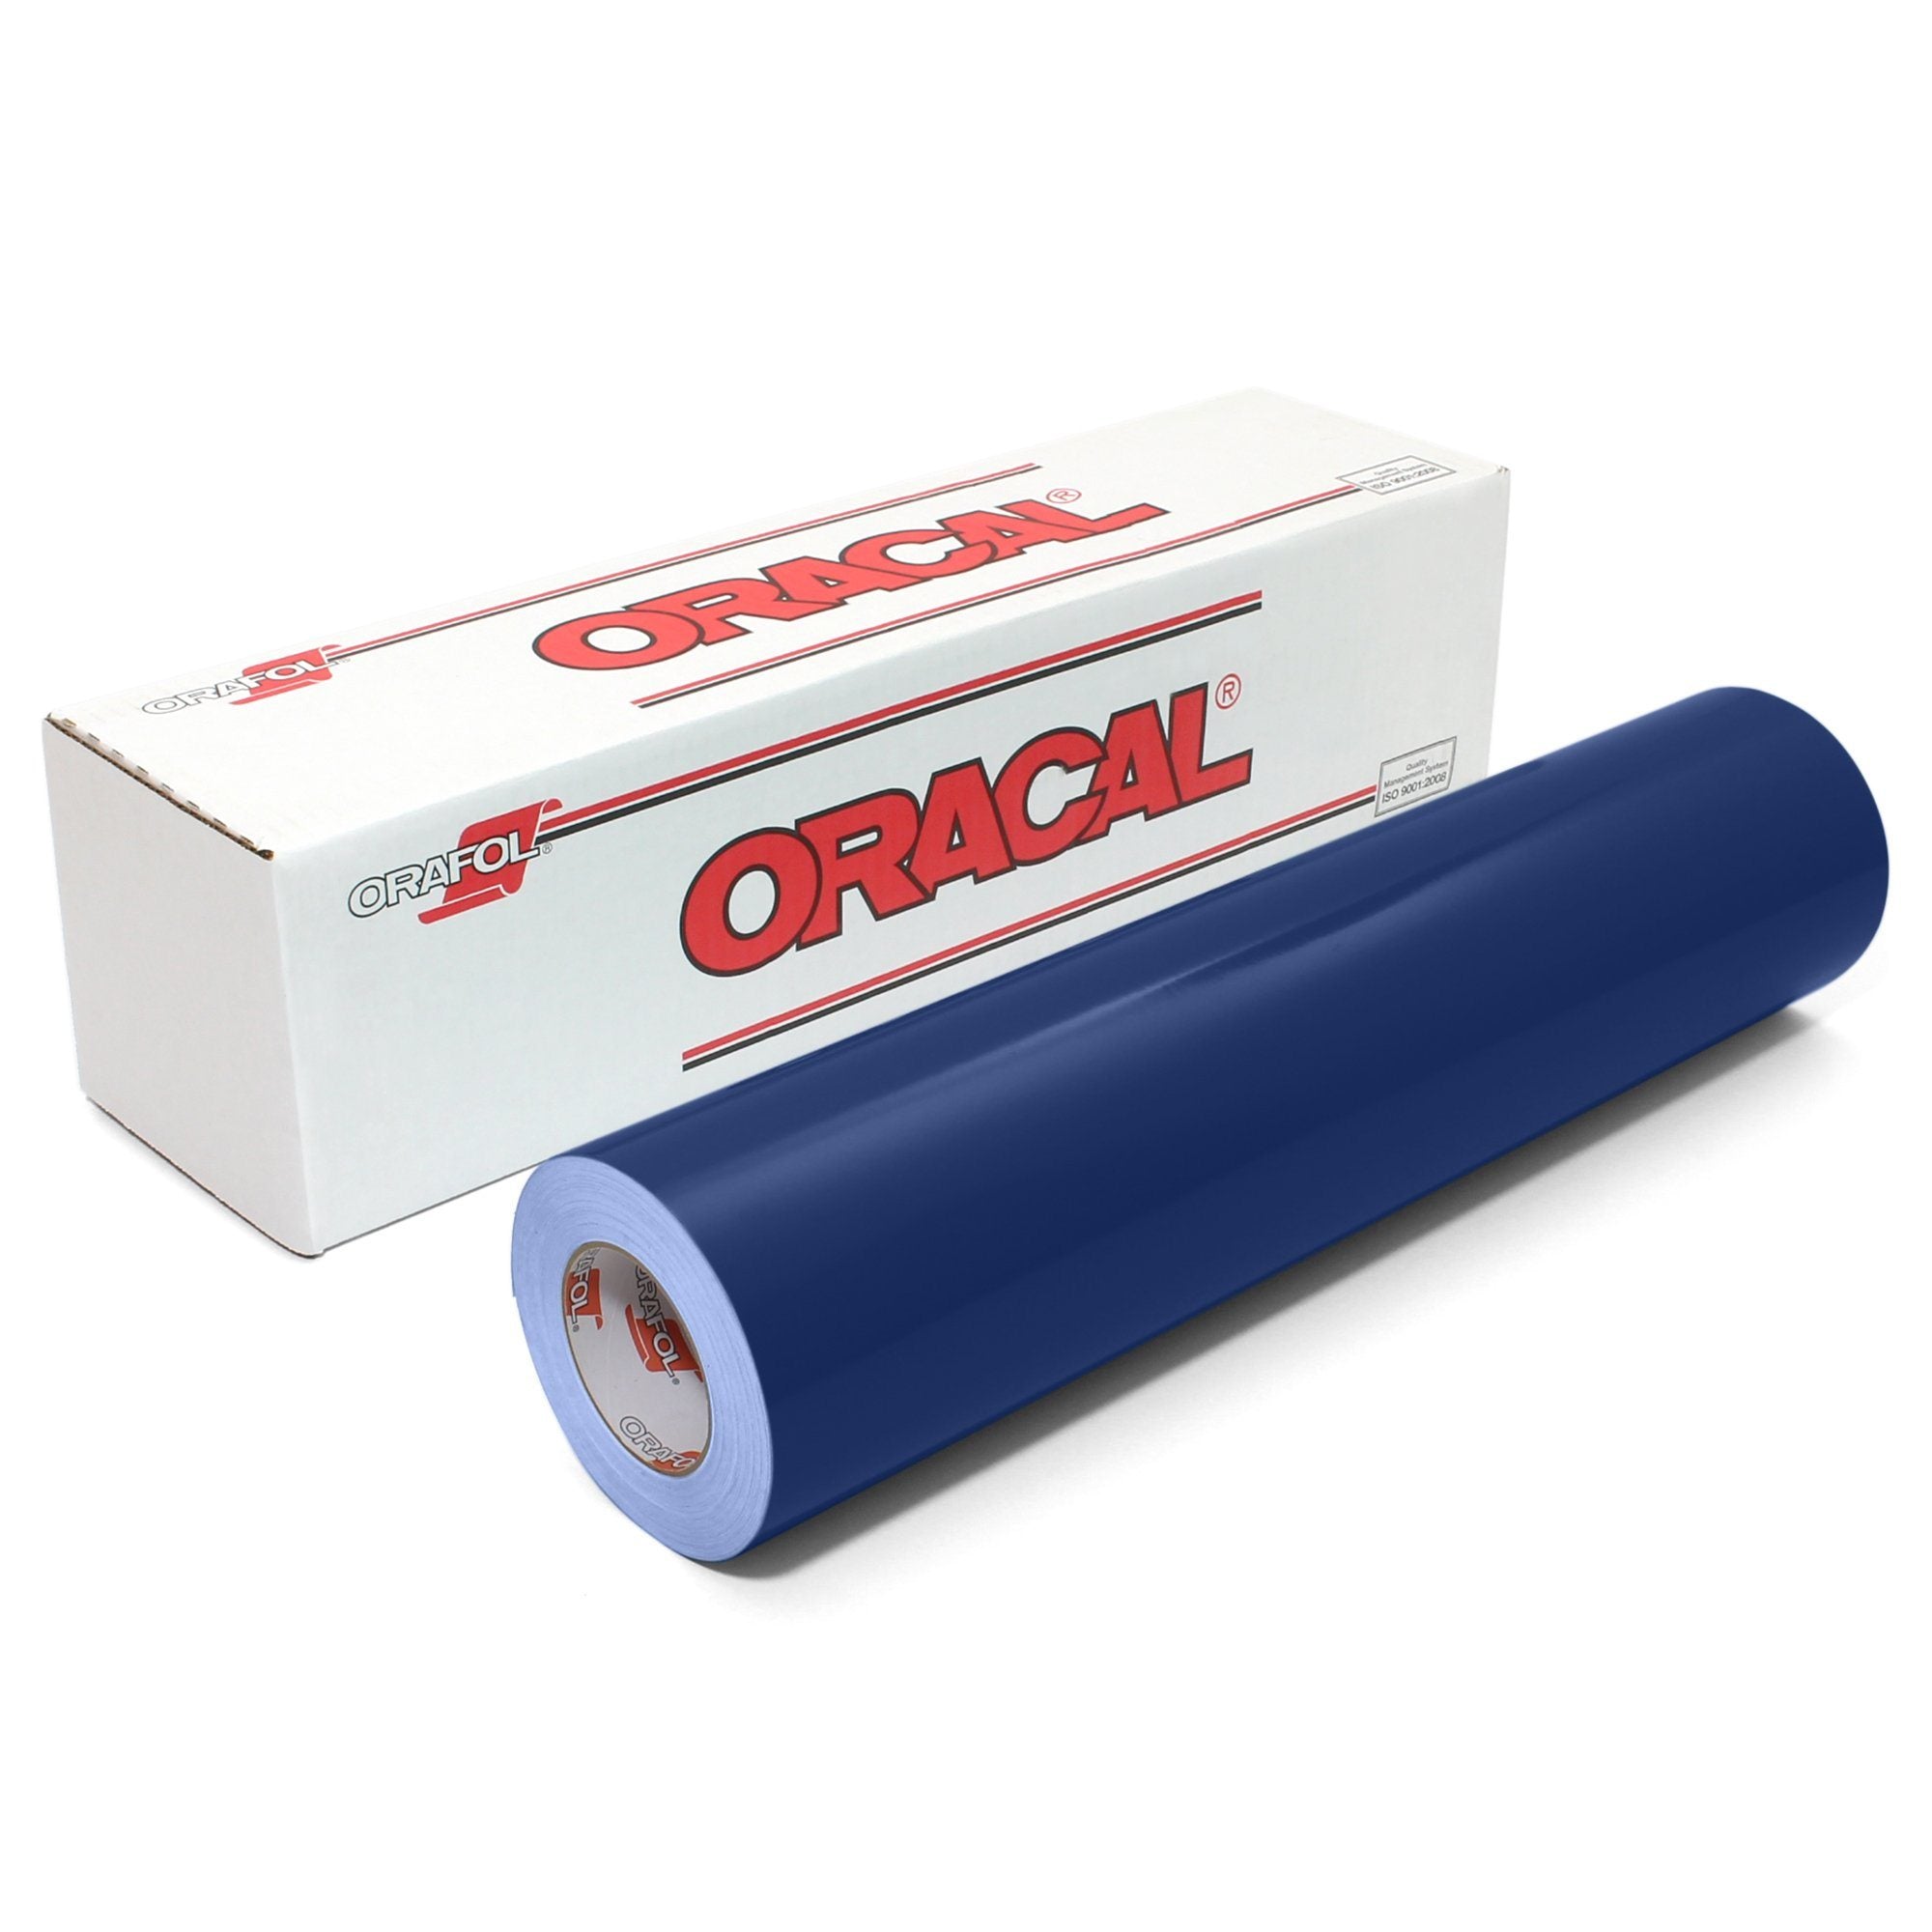 Oracal 651 Vinyl -12x5 Ft roll Adhesive Vinyl 61 Colors Available